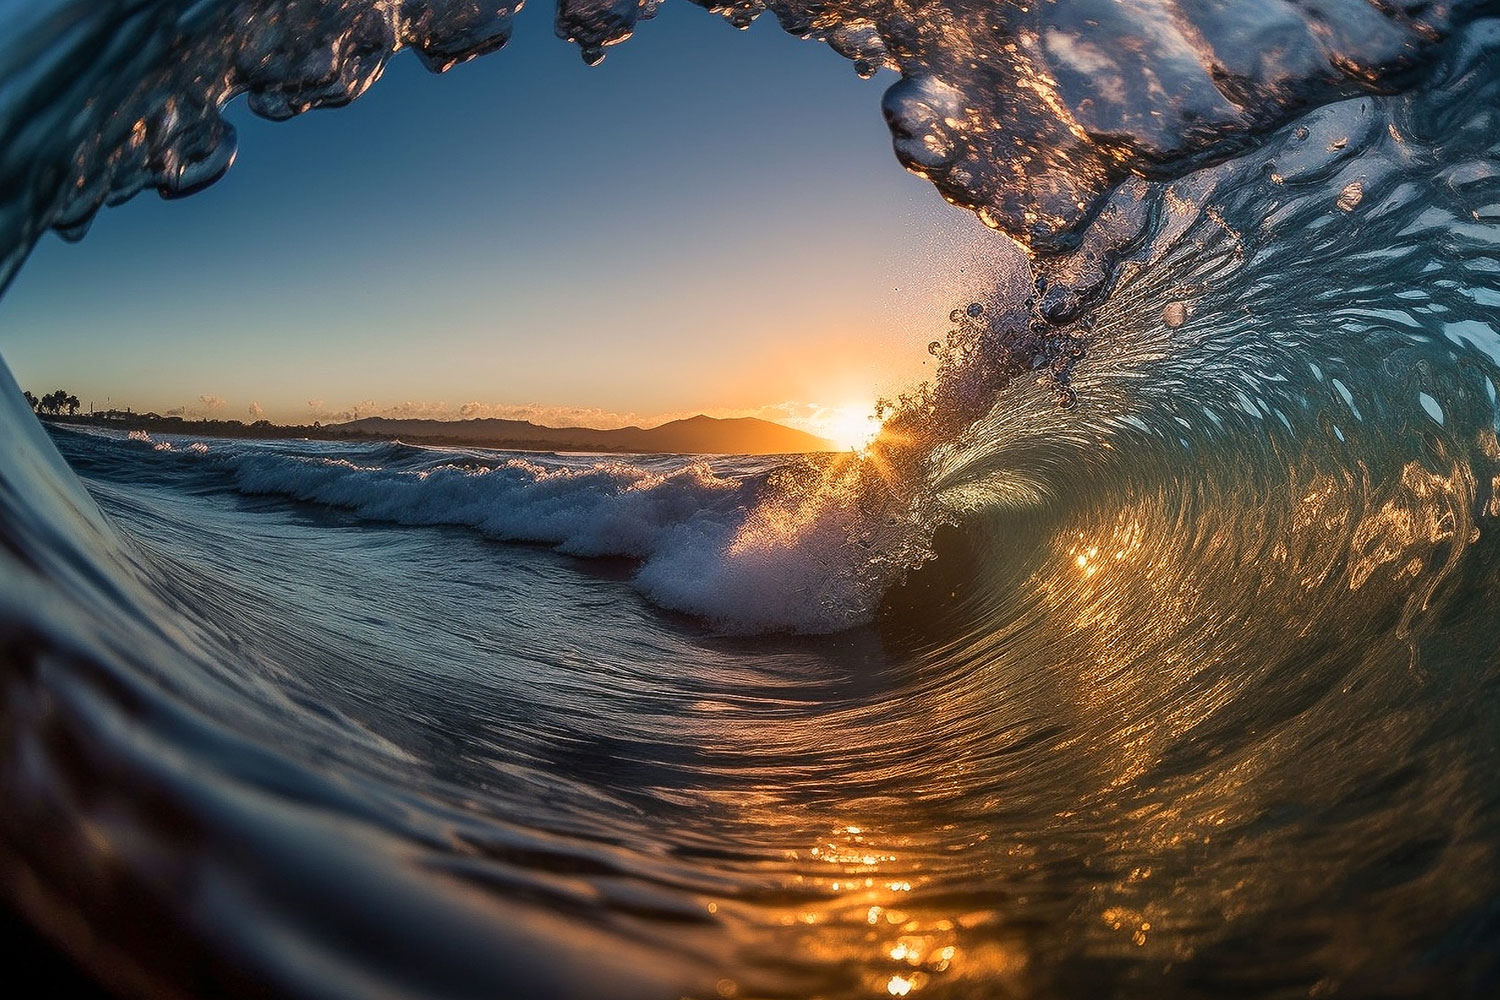 view from inside a wave looking at the coastline and a sunset